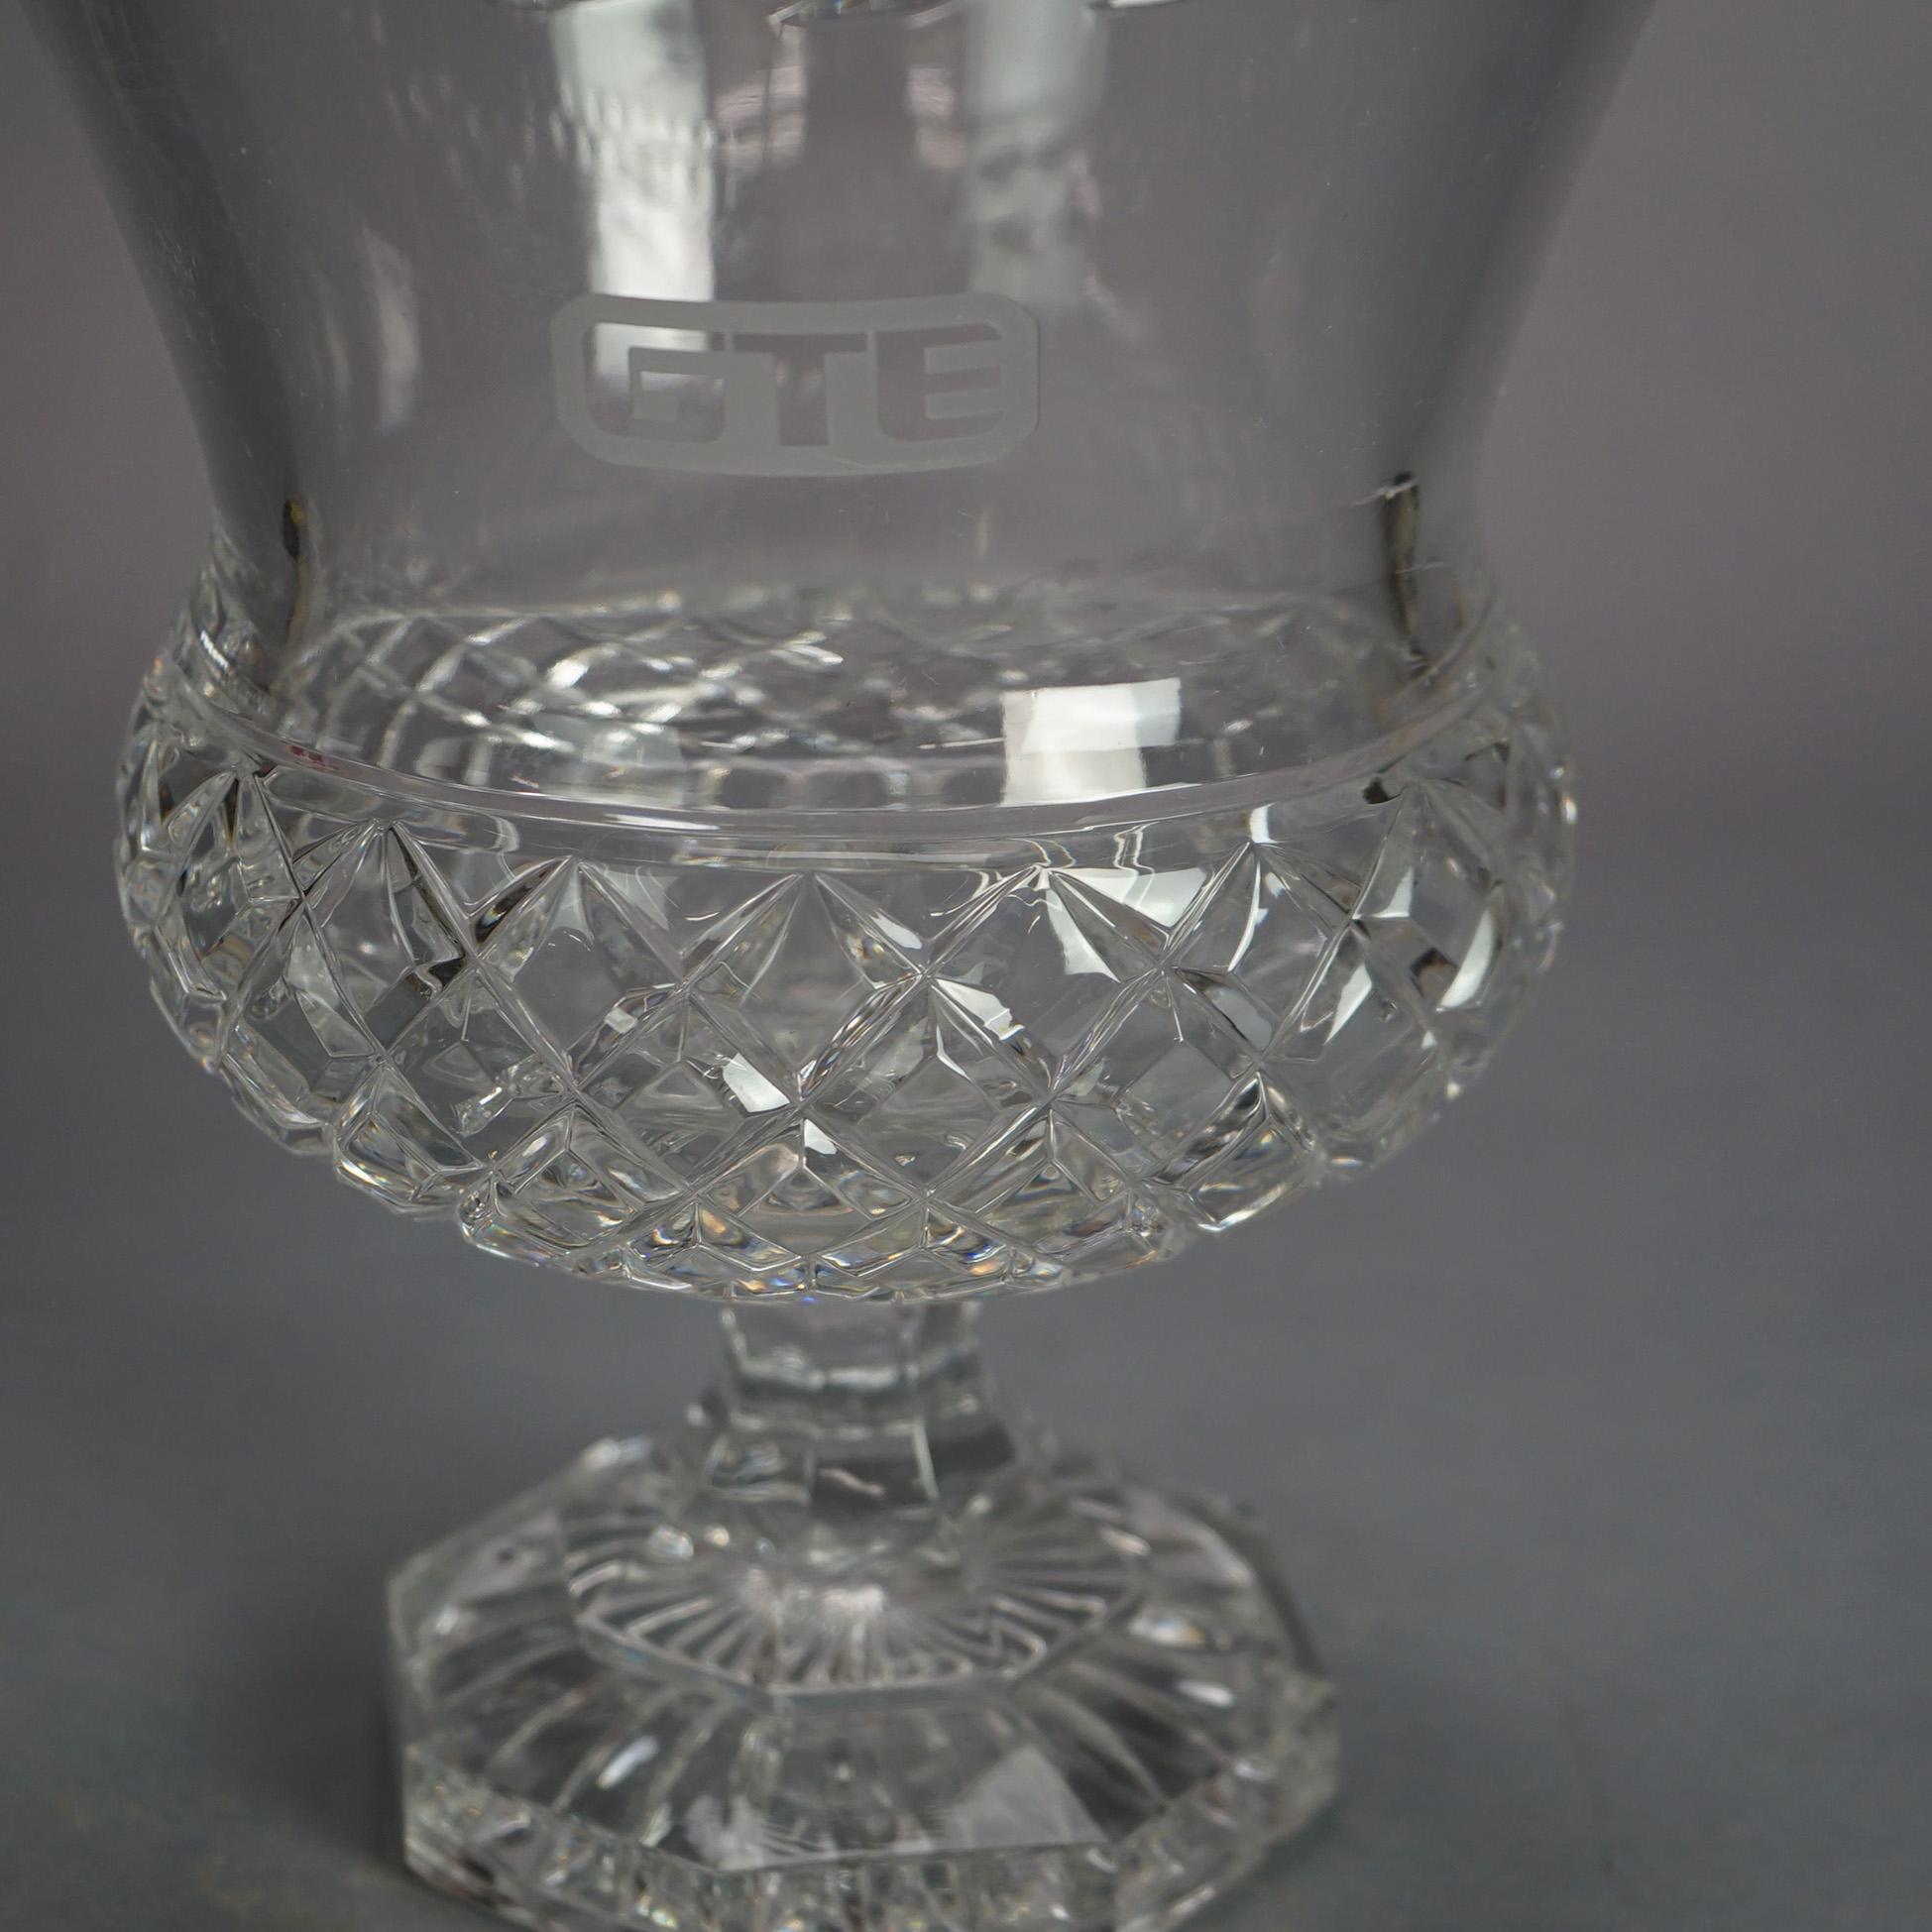 Steuben School Engraved Crystal GTE Trophy Award Cup Vase C1950 In Good Condition For Sale In Big Flats, NY